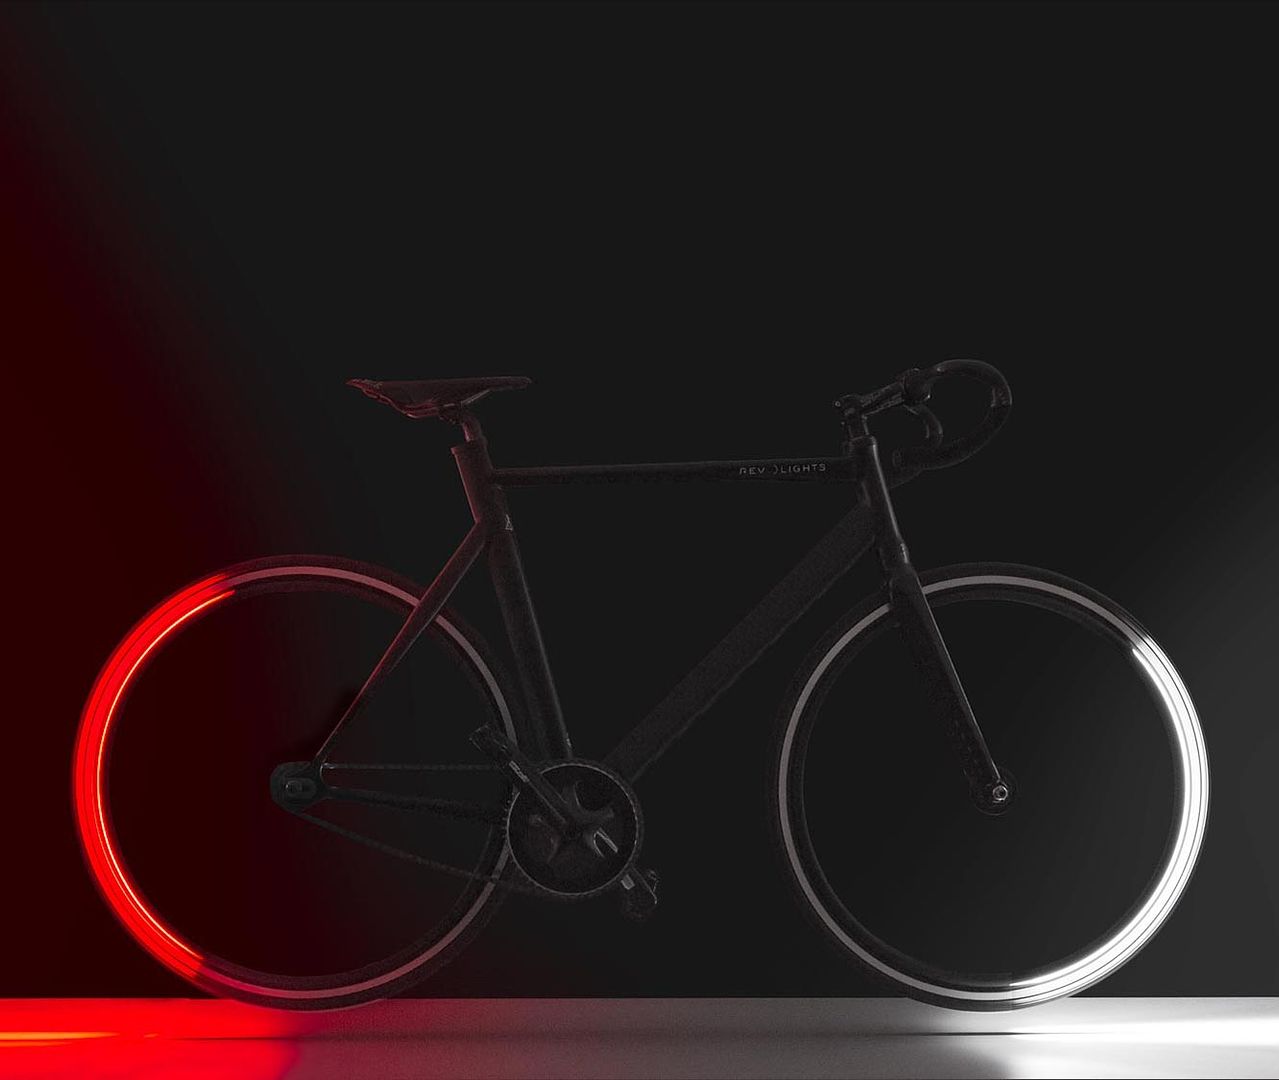 Revolights adjust as you ride, indicating to cars when you're slowing down or speeding up